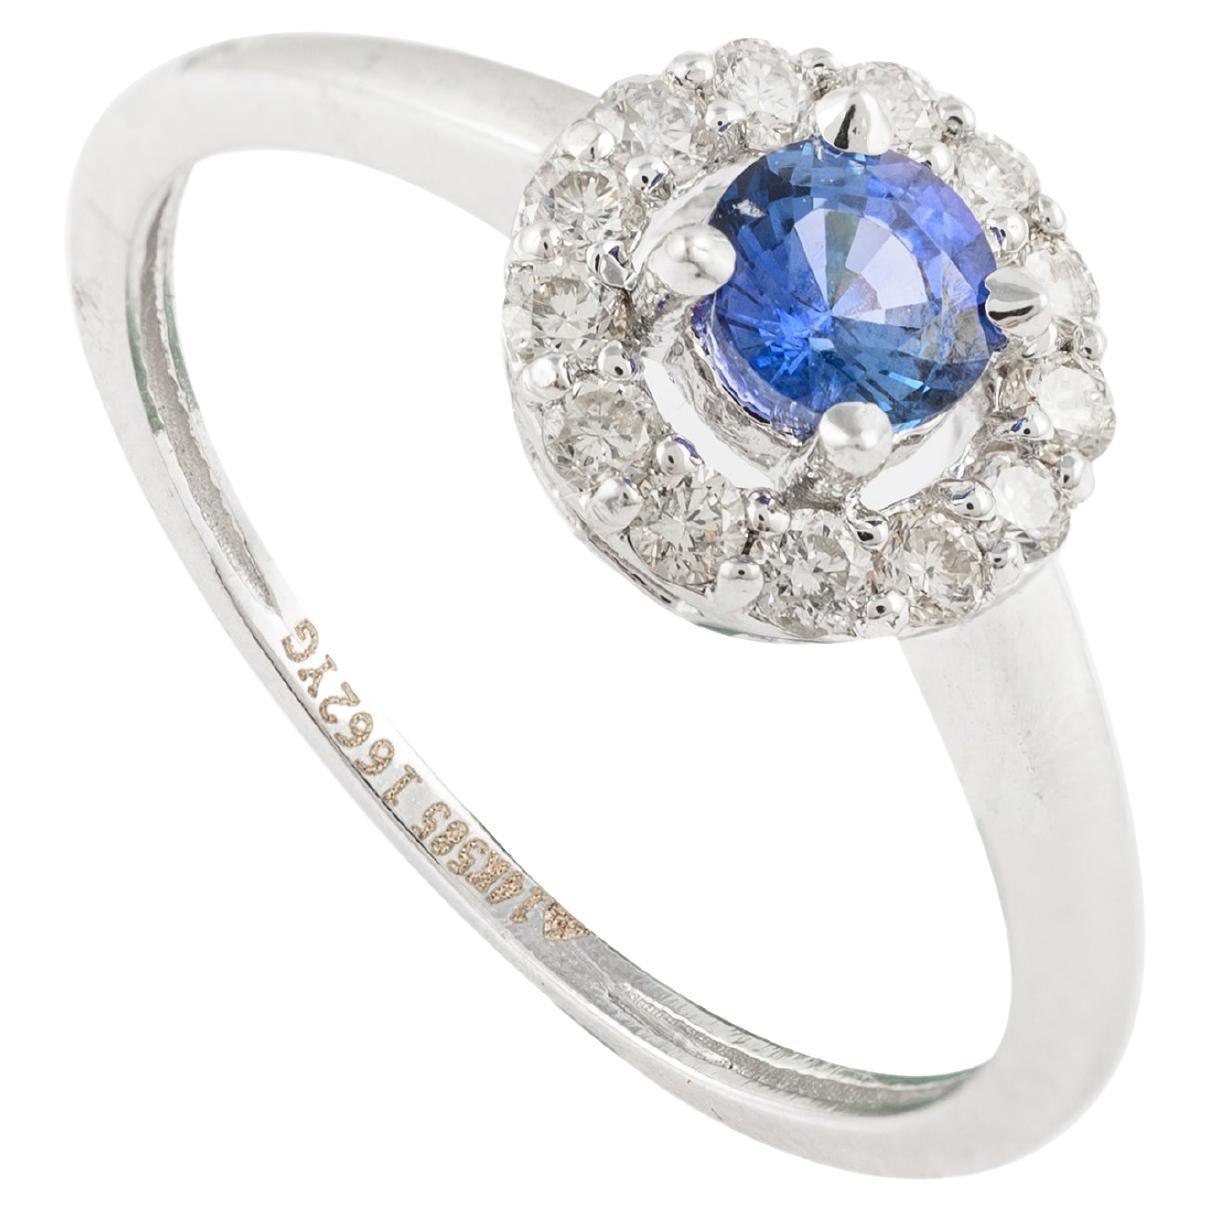 For Sale:  14K Solid White Gold Classic Round Blue Sapphire Ring with Halo Diamonds